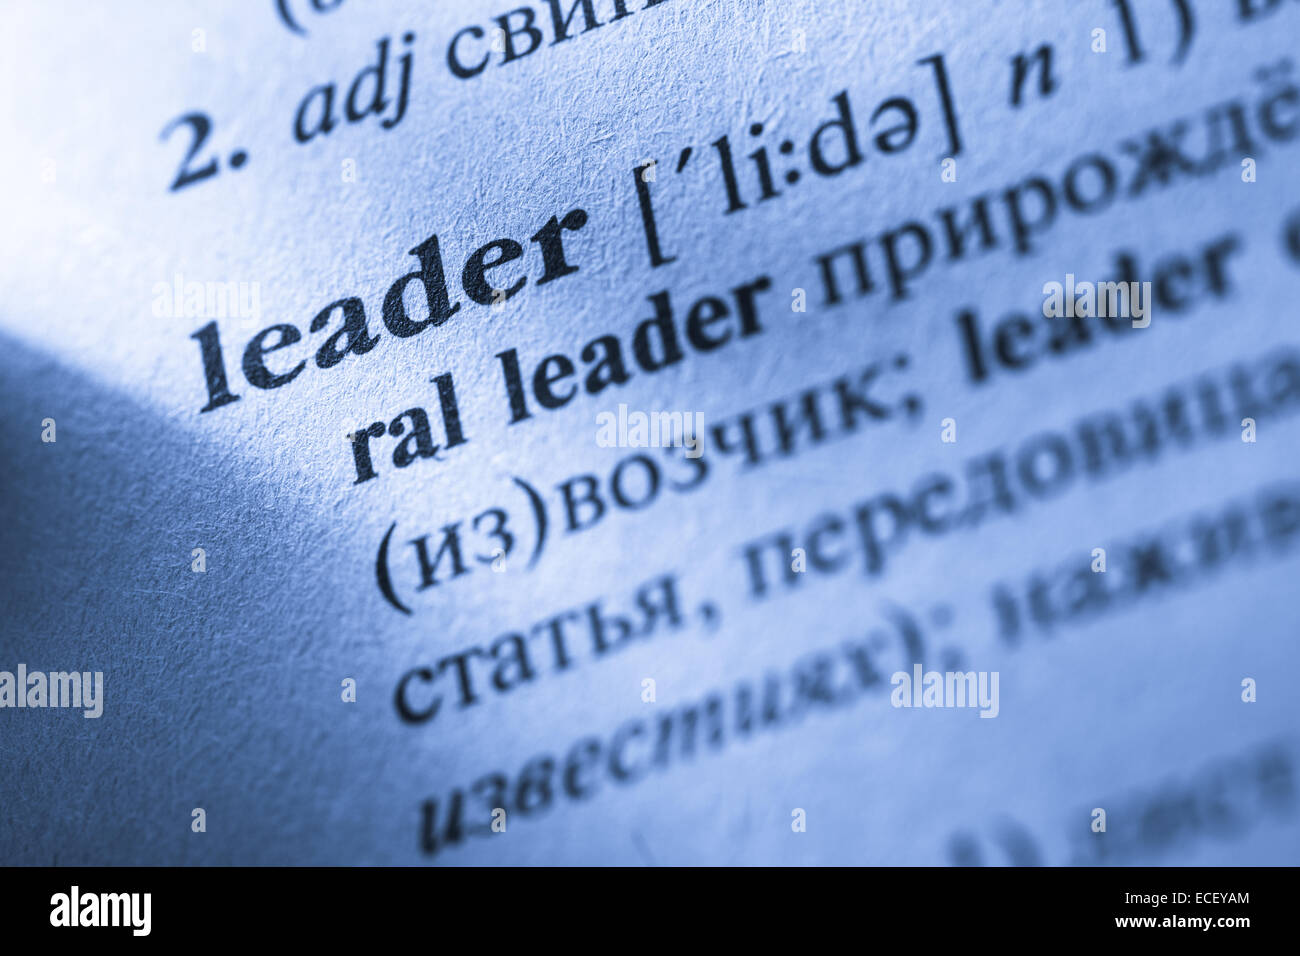 Word Leader translation and definition from English into Russian Stock Photo